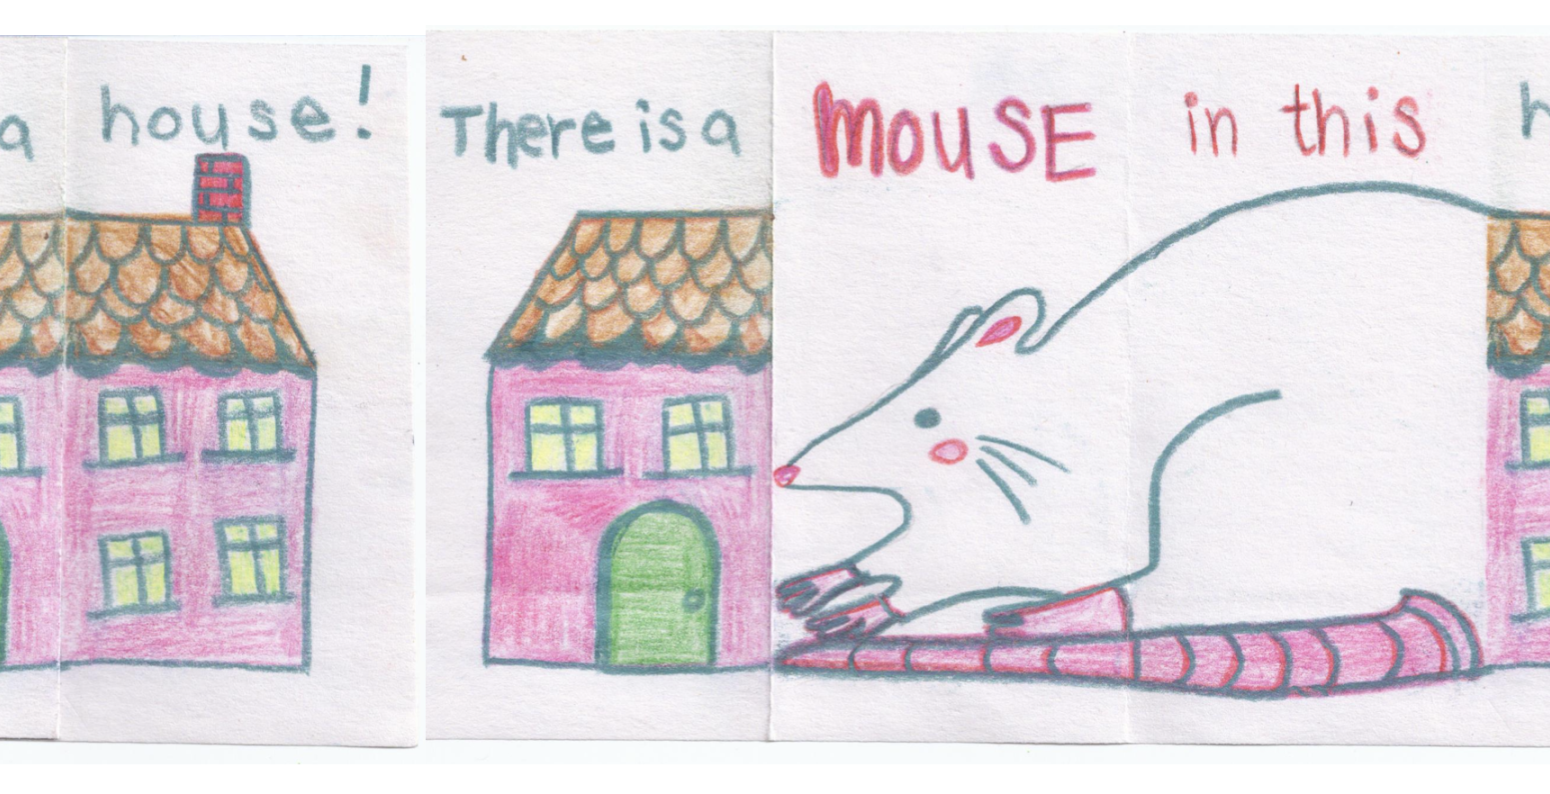 Folded drawing of a simple house. Image expands to an illustrated mouse in the house.